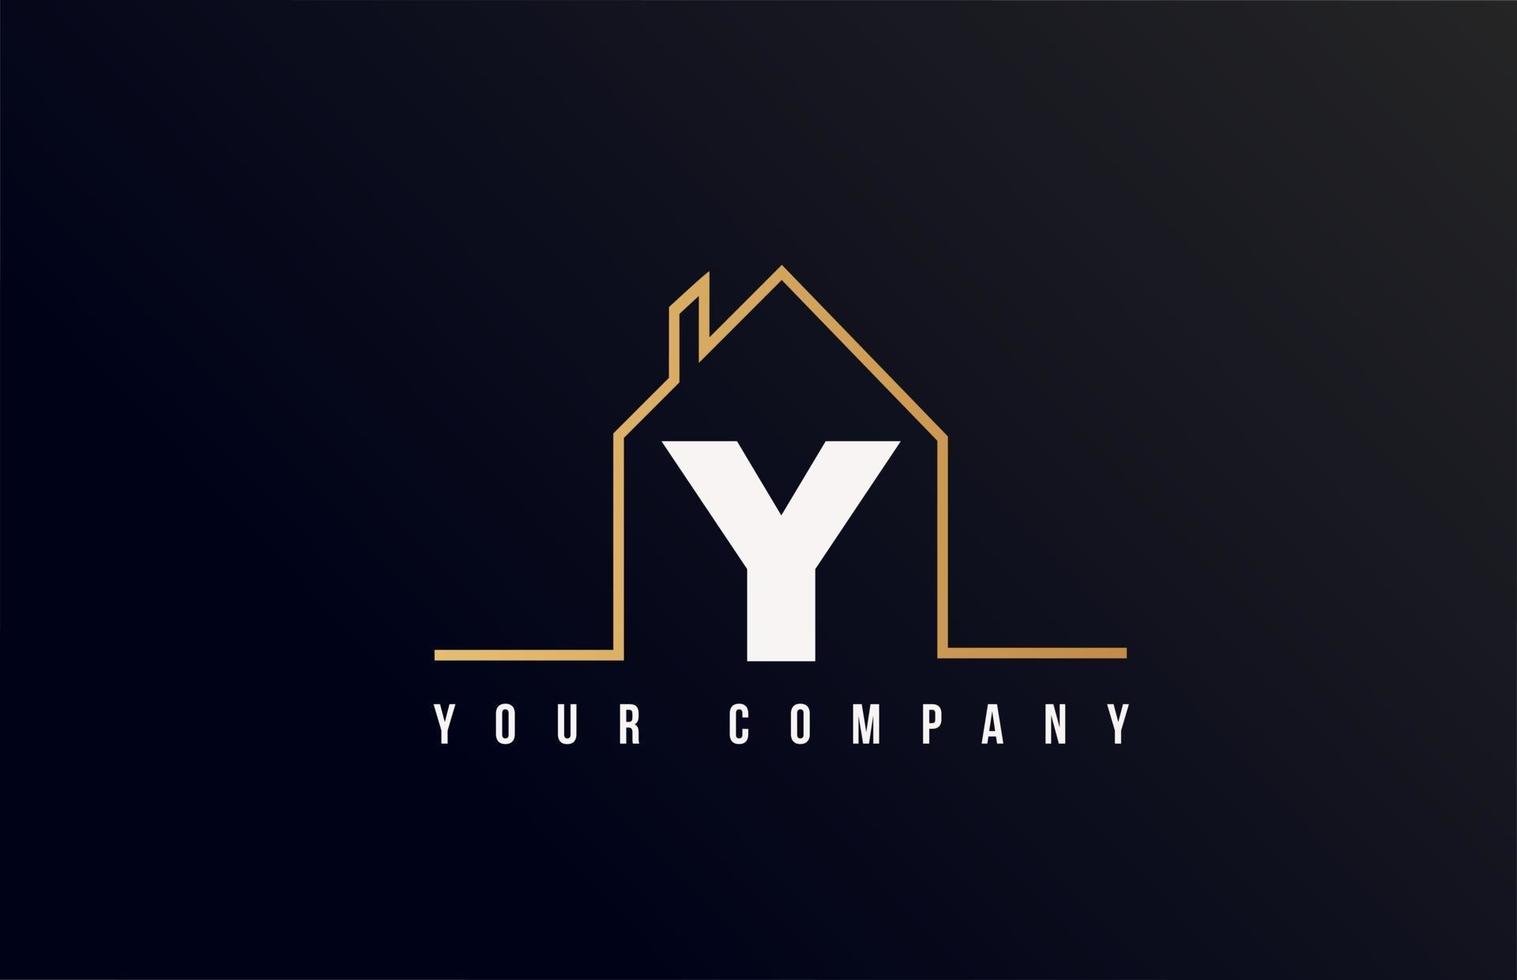 Y house alphabet letter icon logo design. House real estate for company and business identity with line contour of a home vector